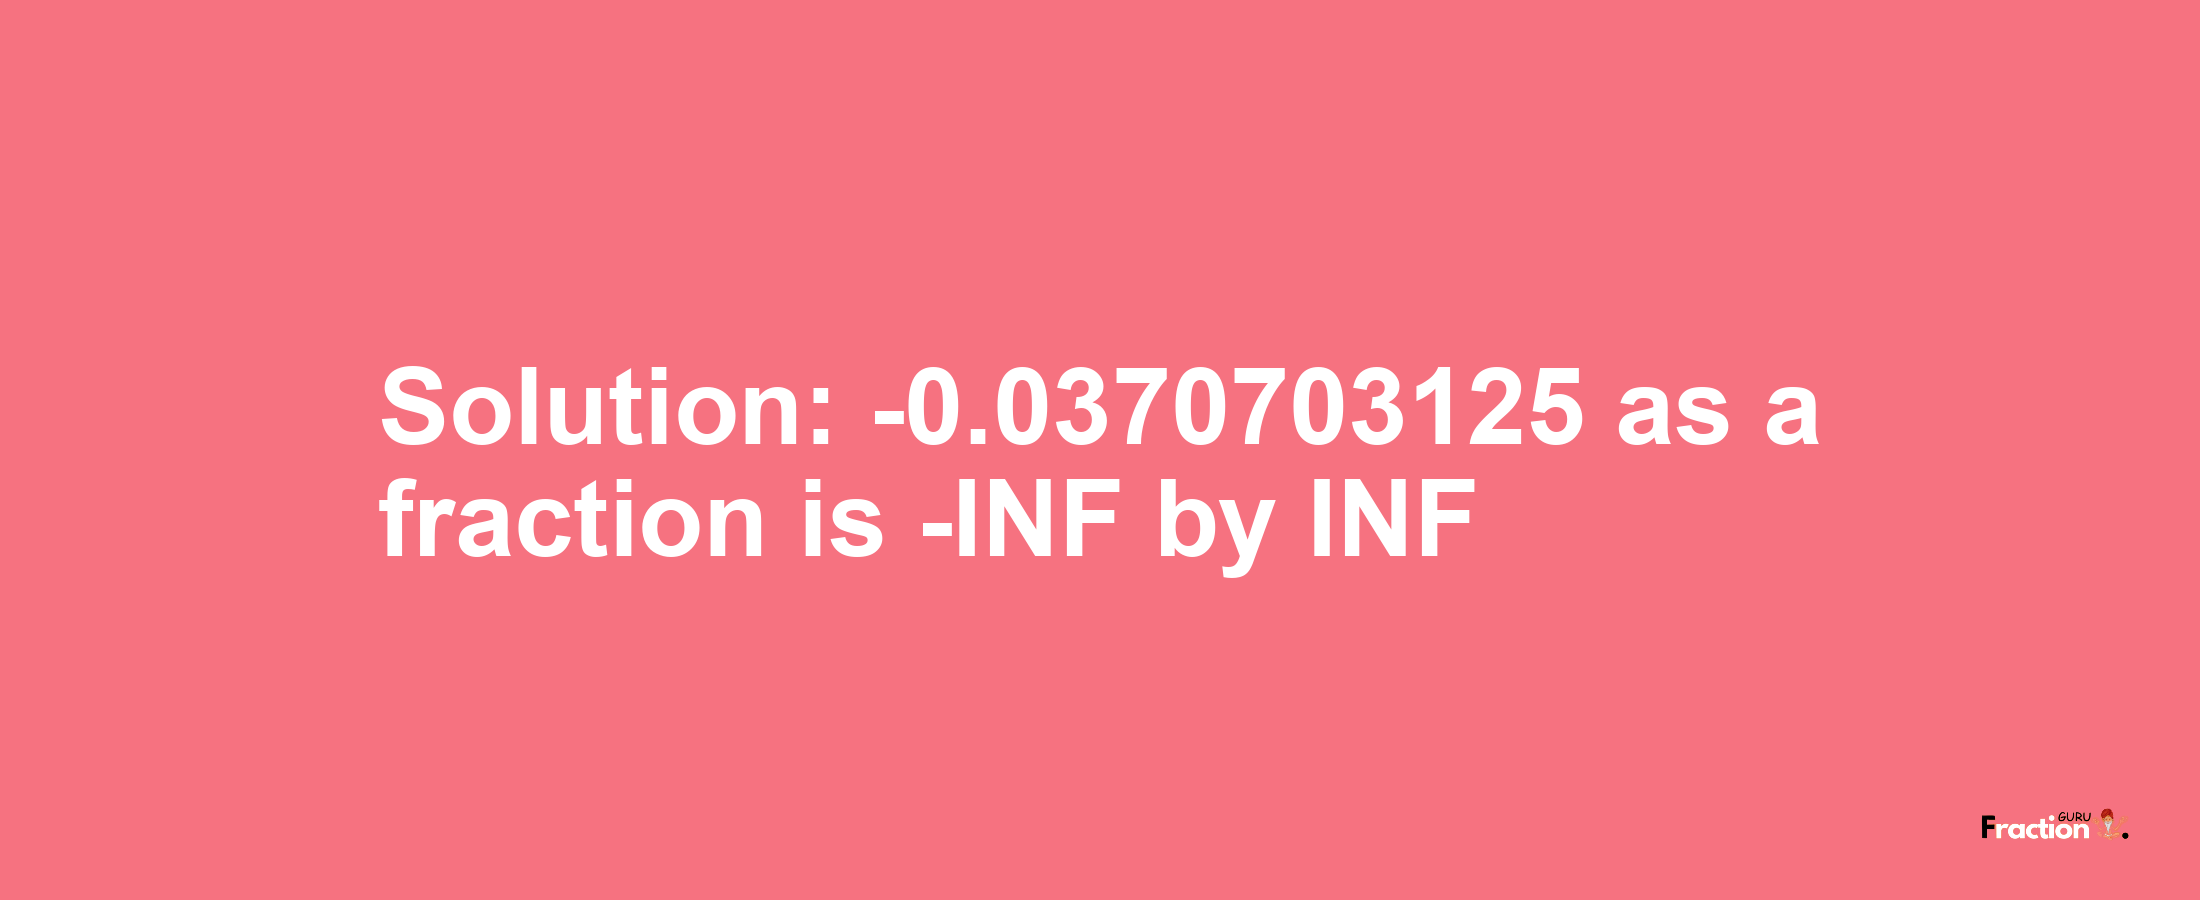 Solution:-0.0370703125 as a fraction is -INF/INF